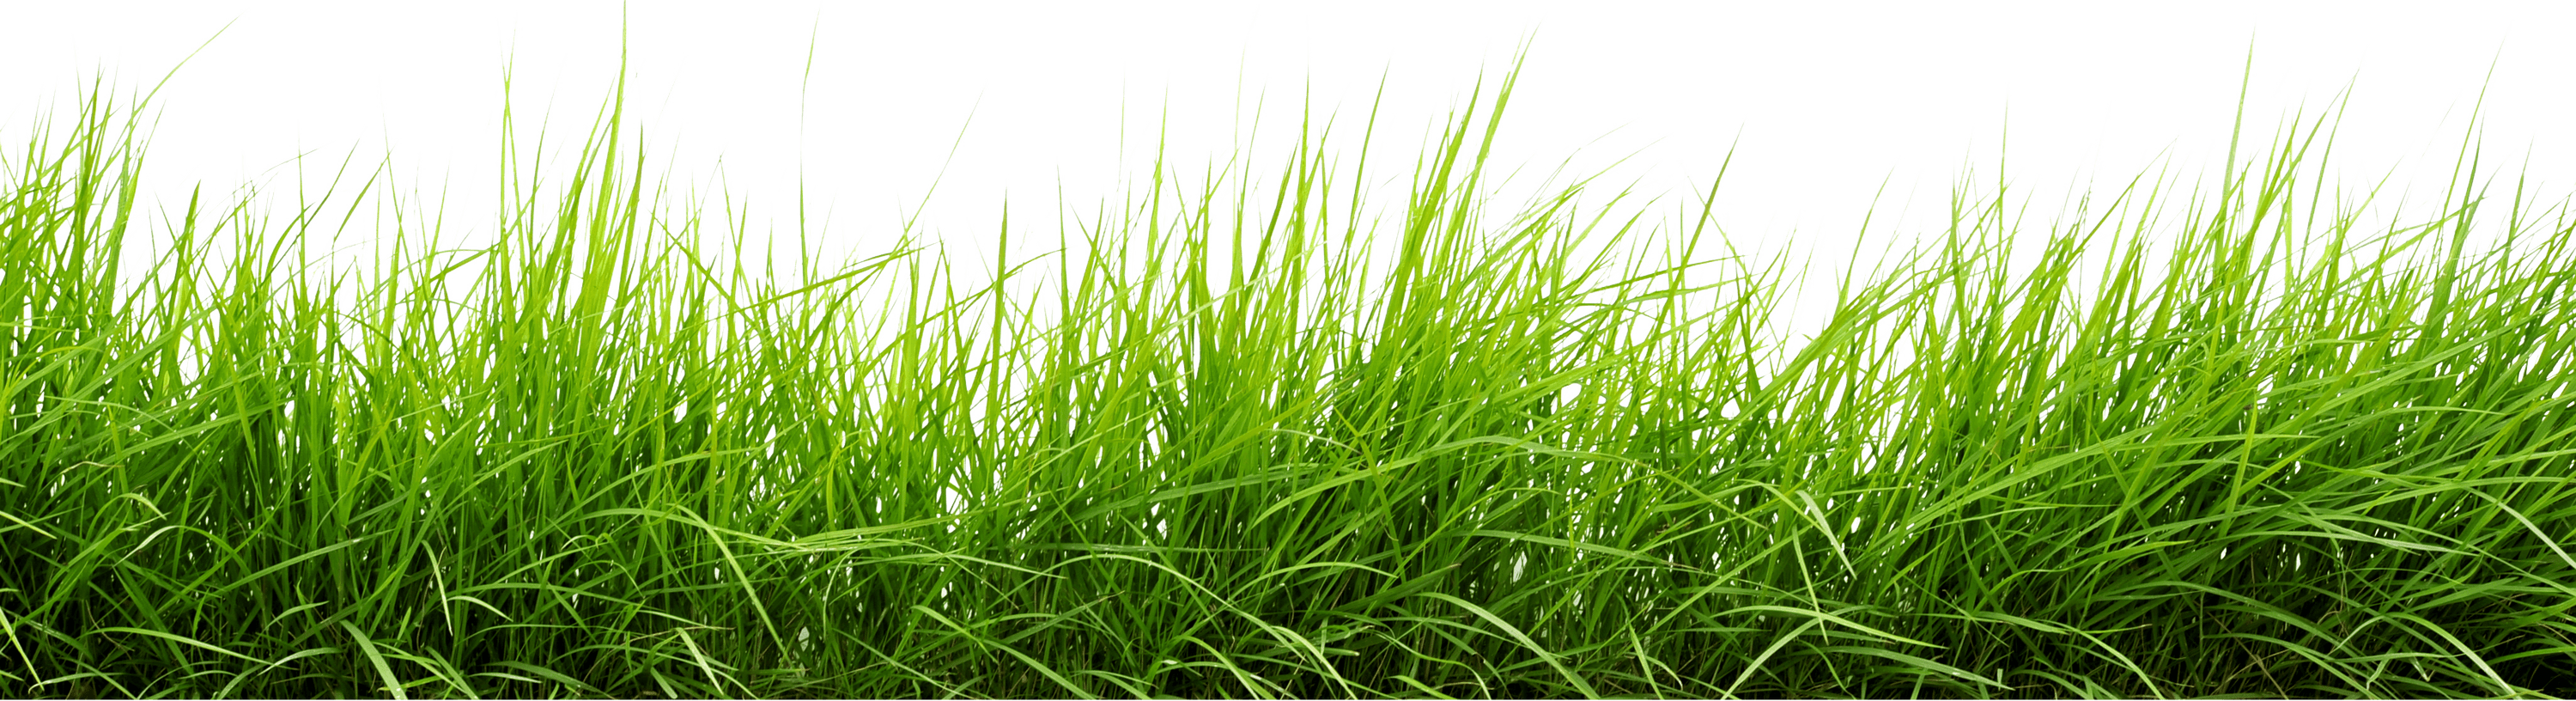 Line Of Grass PNG Images Transparent Background | PNG Play